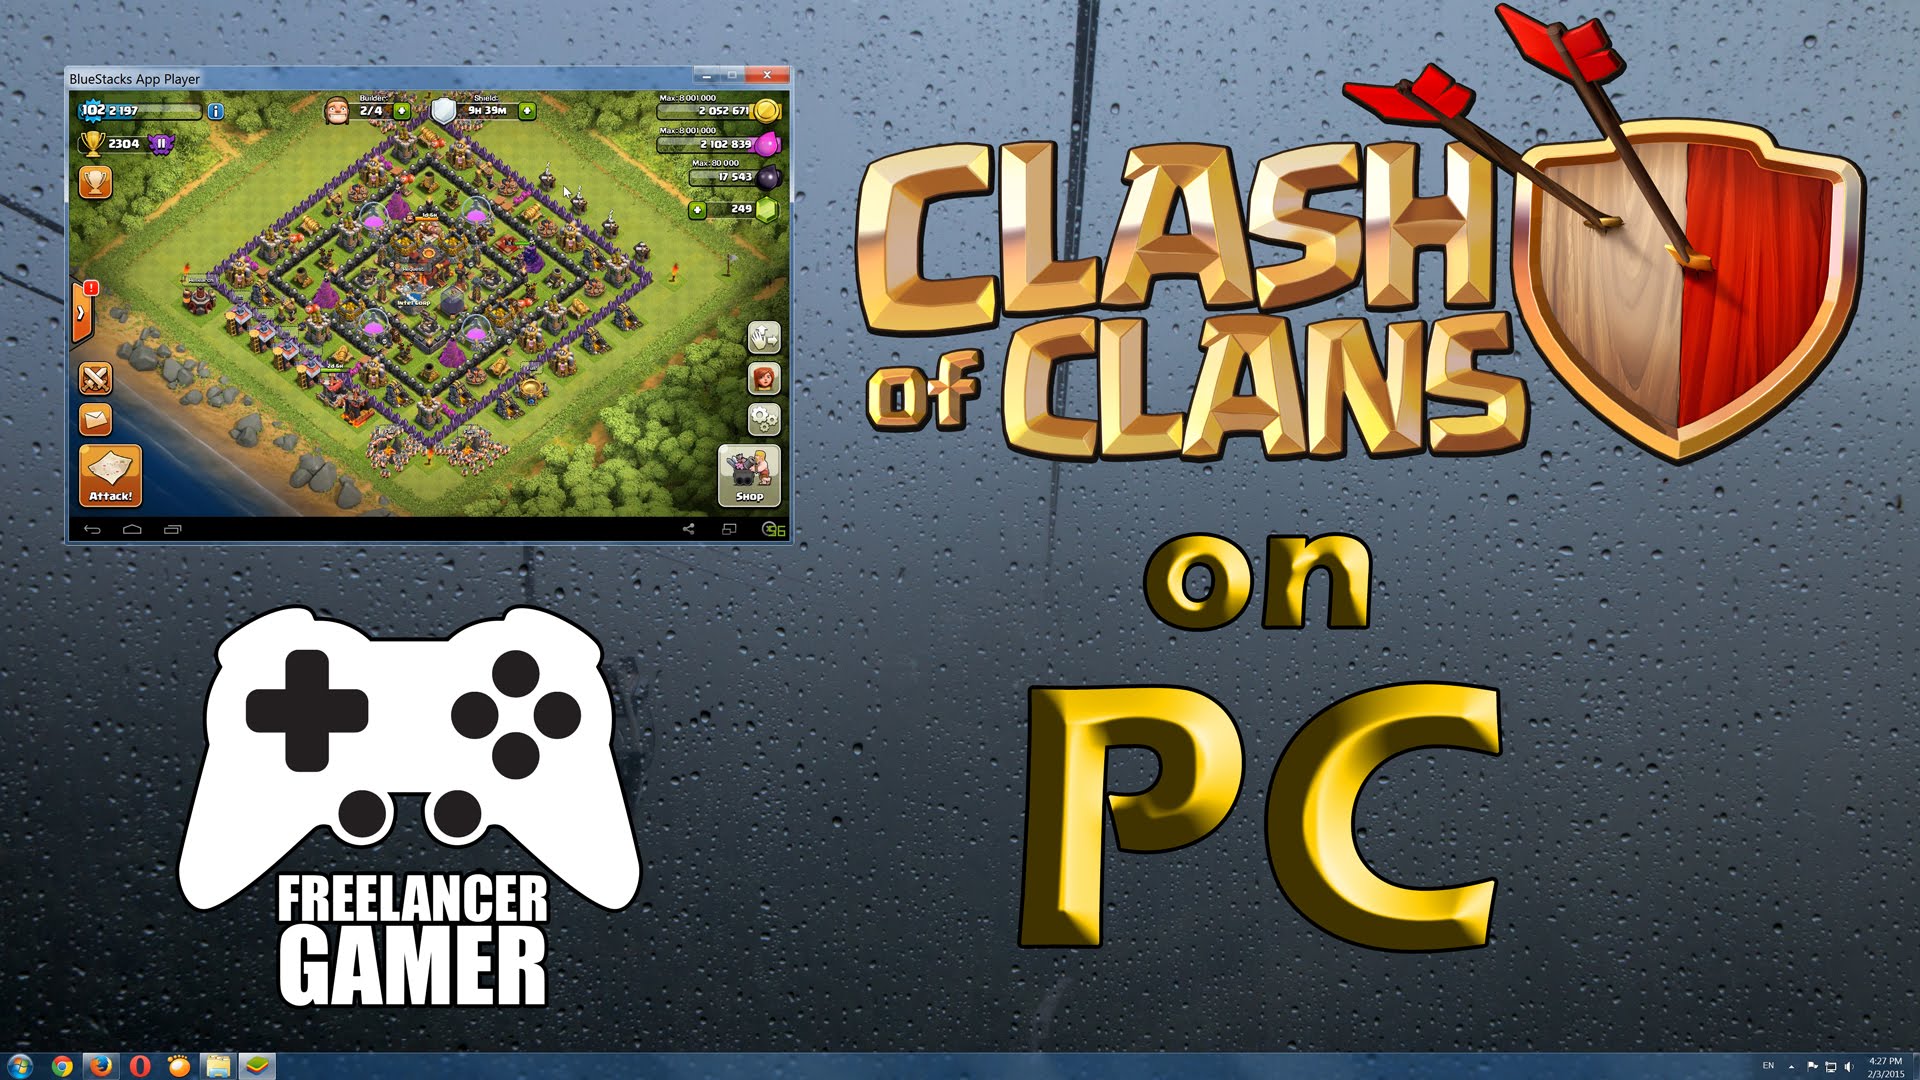 How to Play Clash of Clans on PC